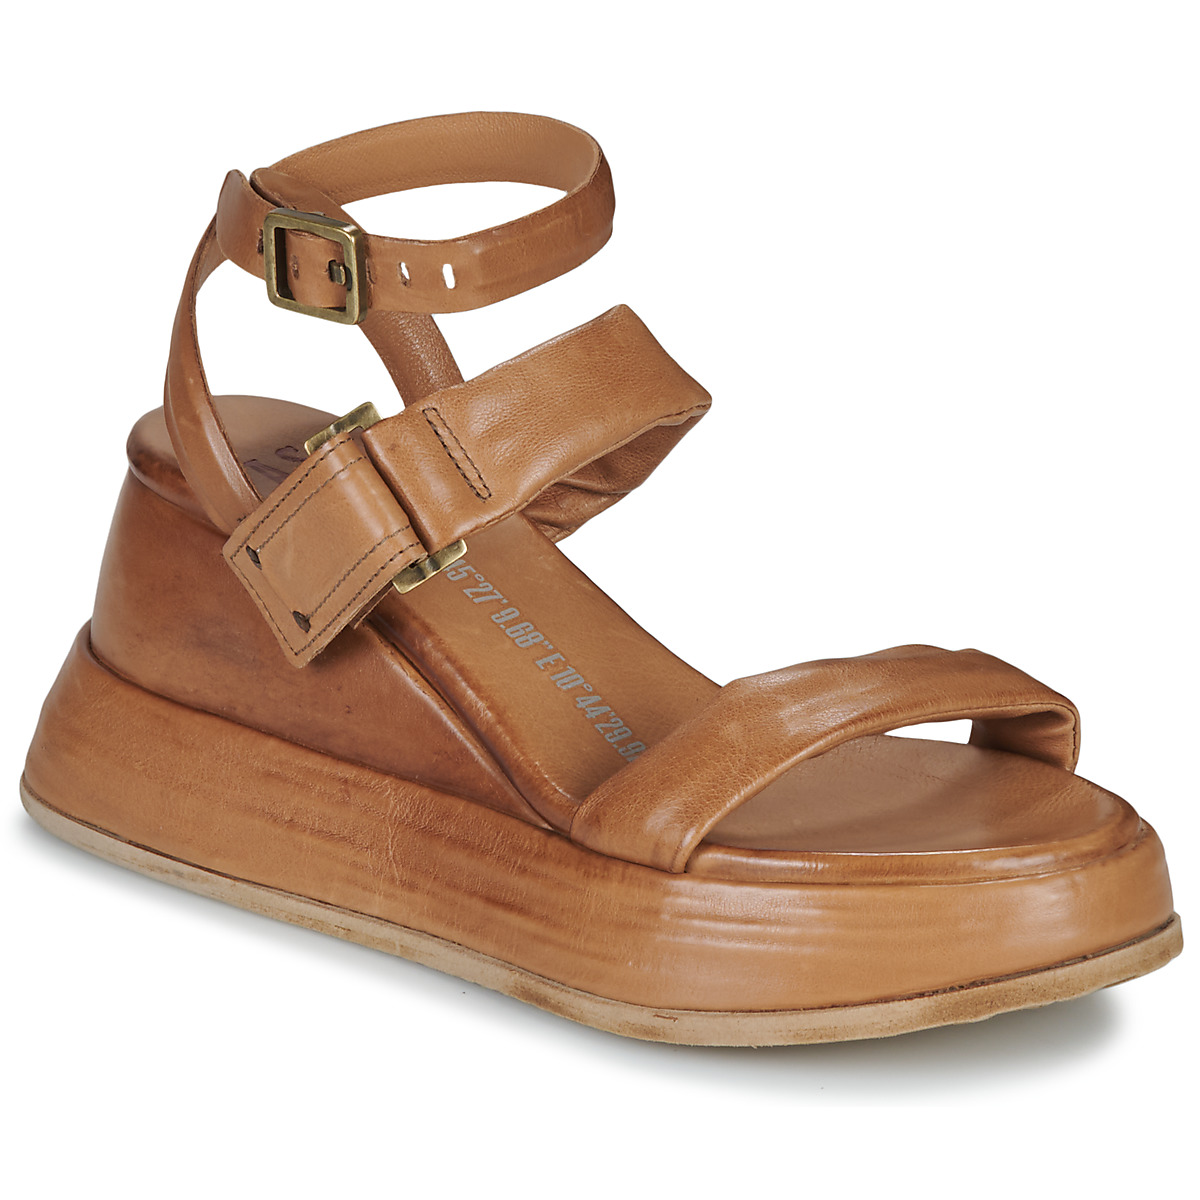 airstep / a.s.98  real buckle  women's sandals in brown